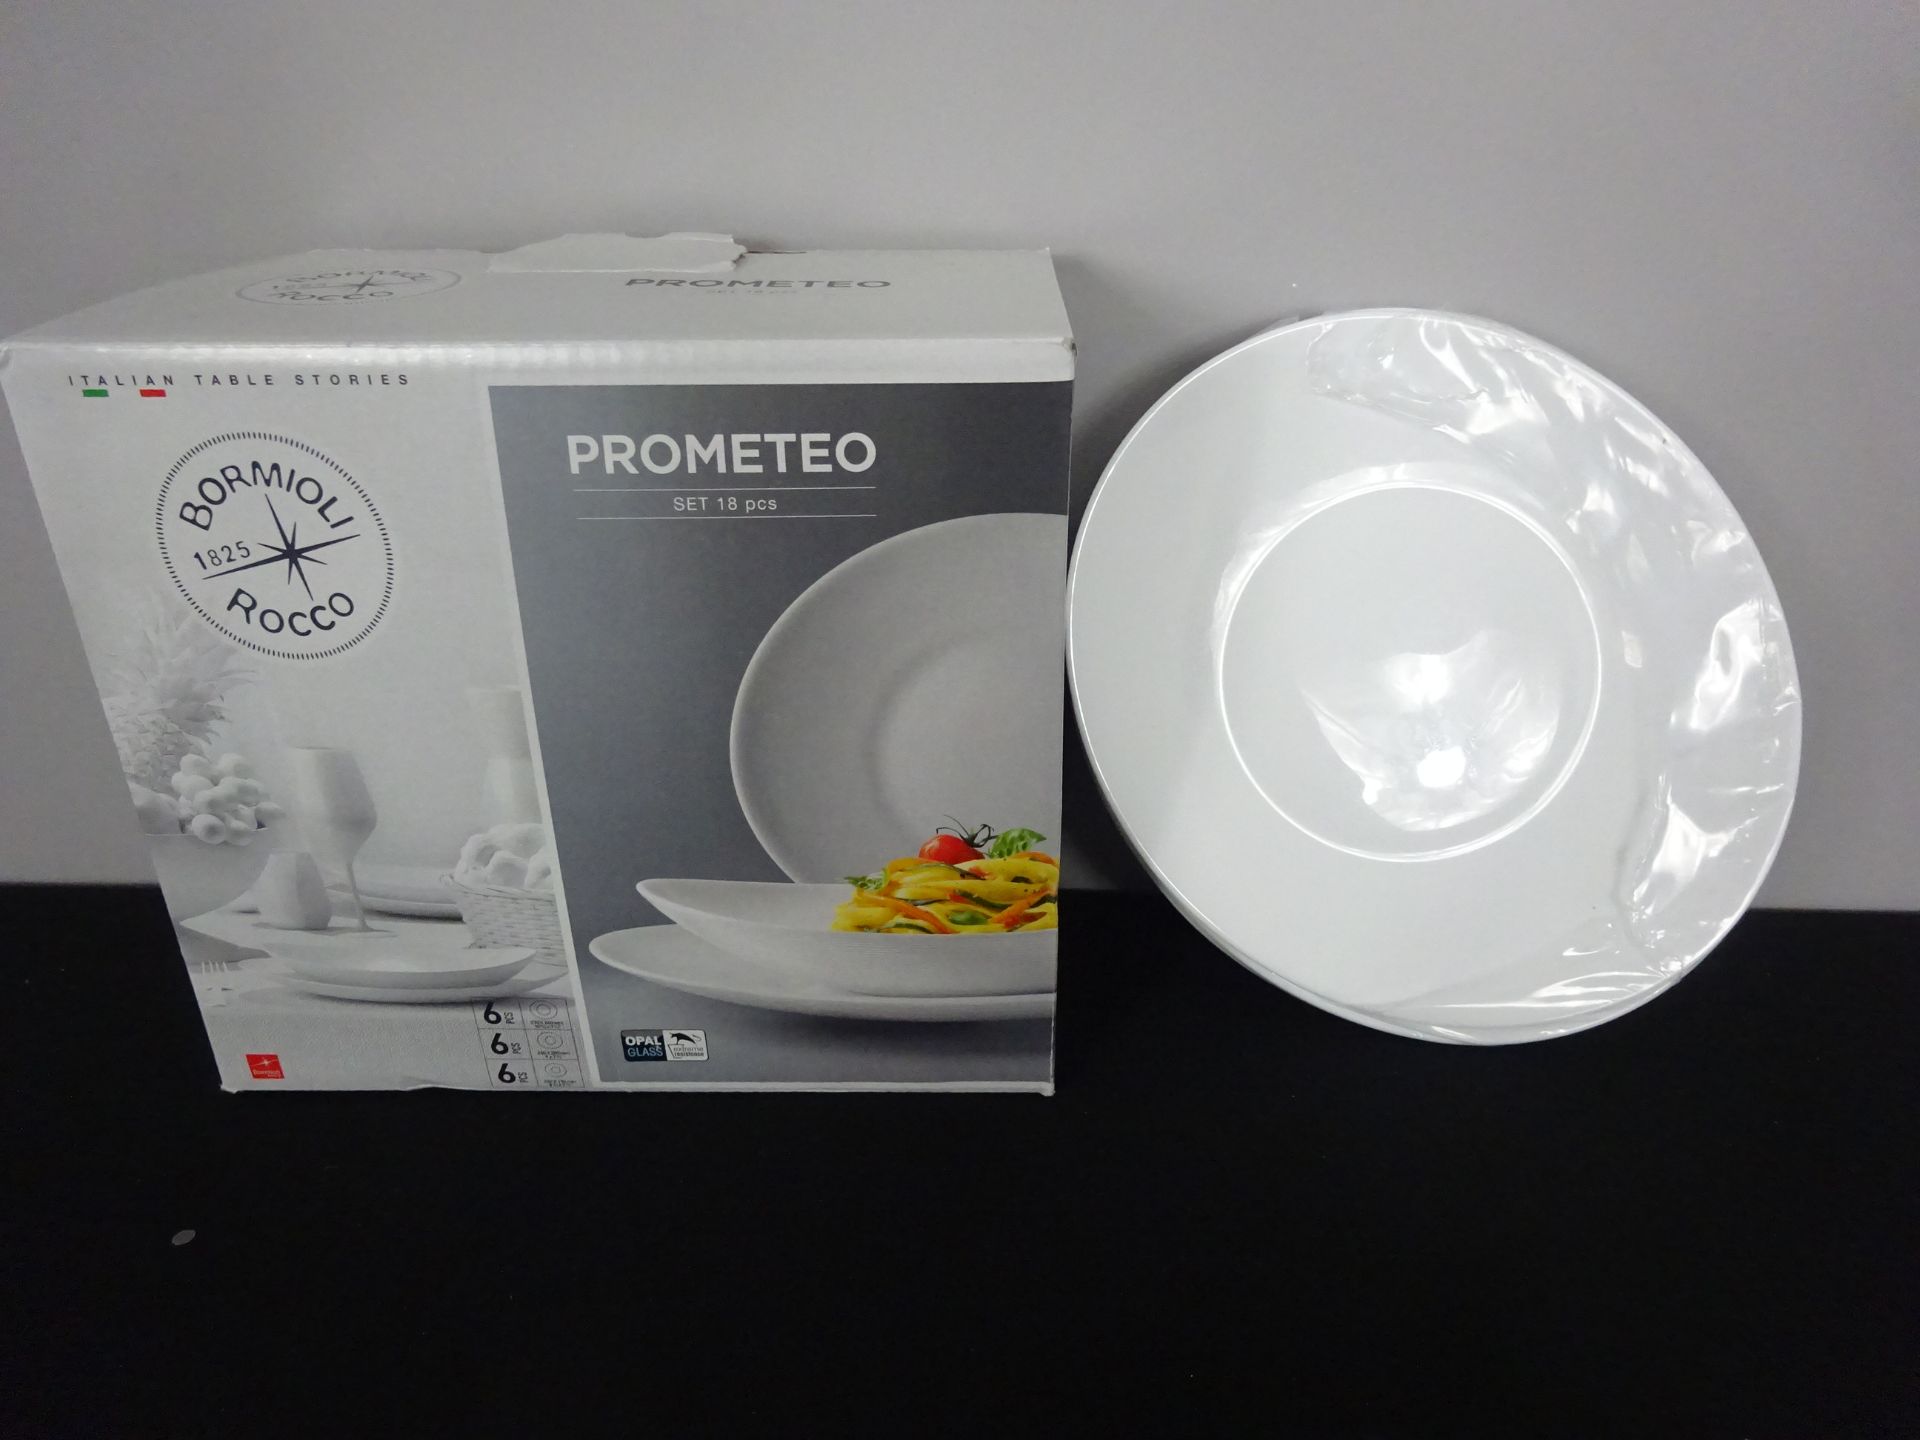 Prometeo 18 Piece Dinnerware Set, Service for 6 RRP £34.40 - Image 2 of 2